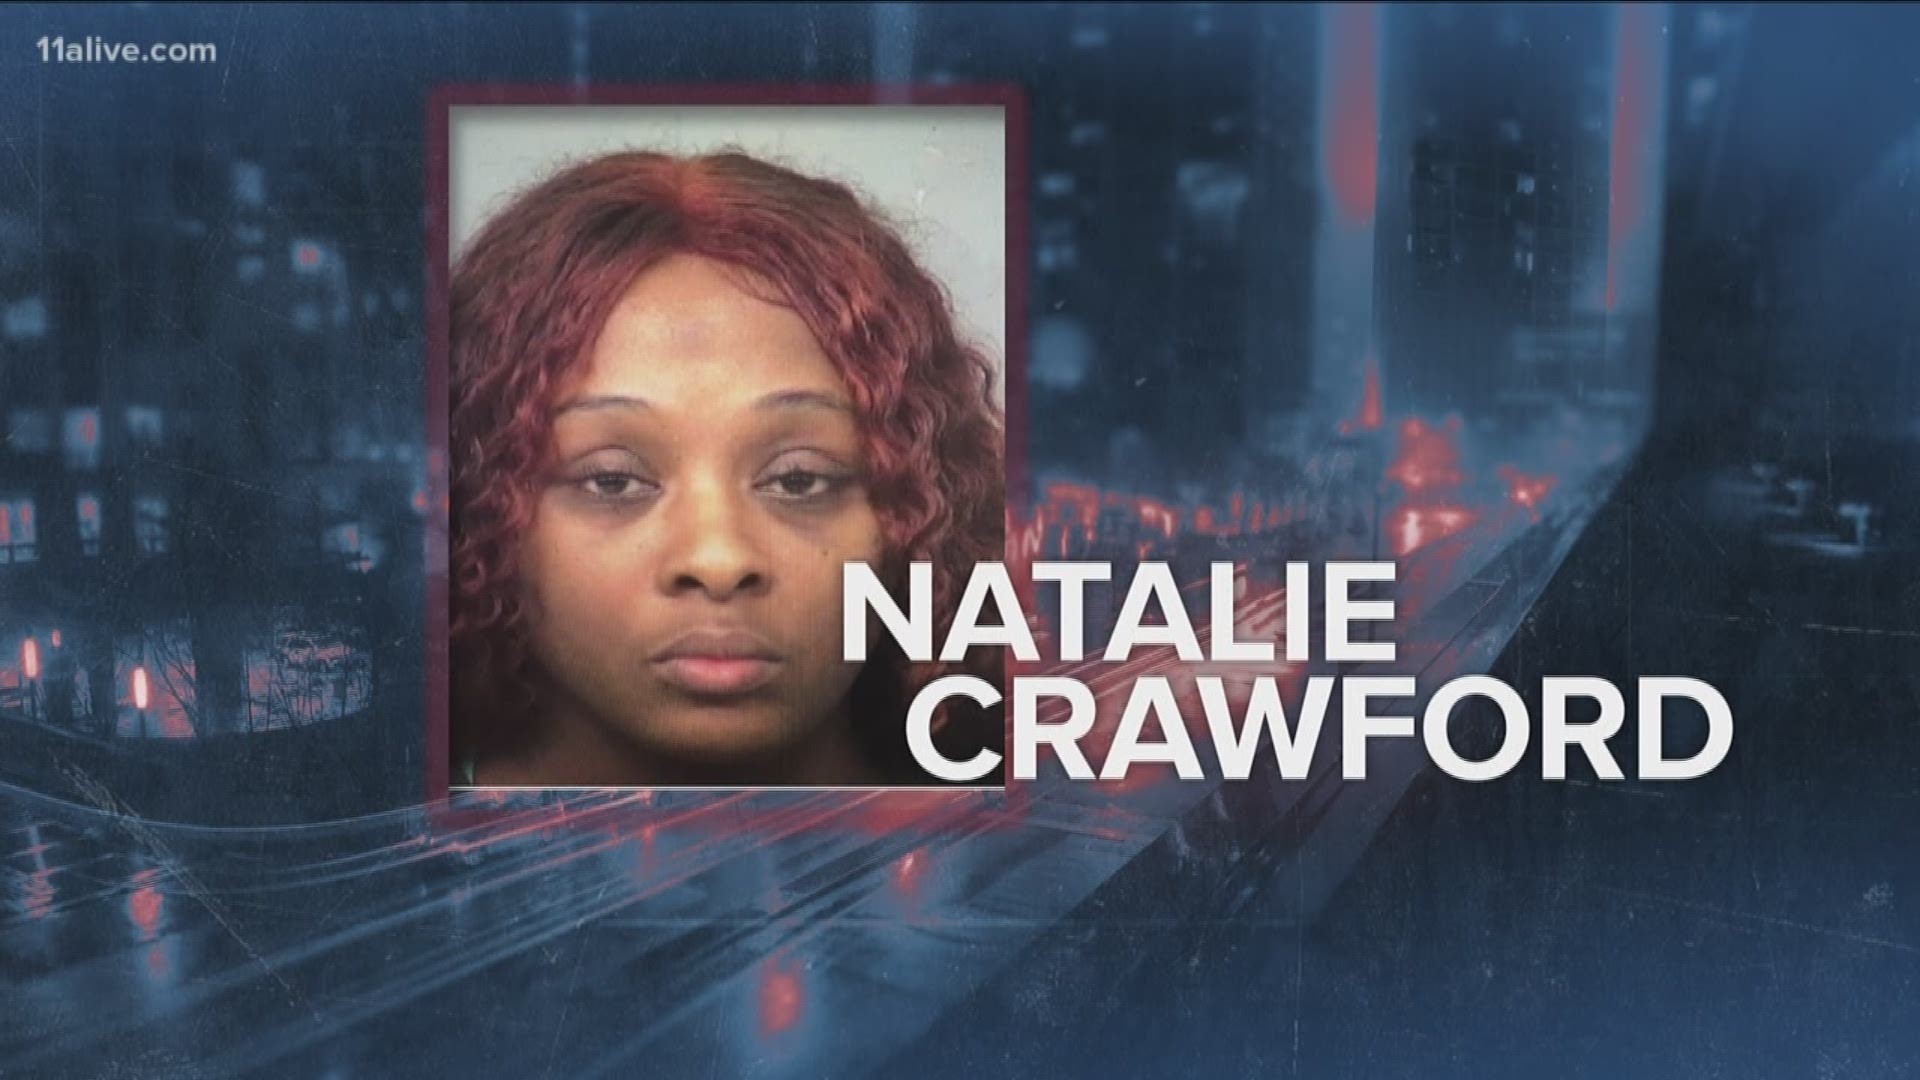 Natalie Crawford now faces felony charges